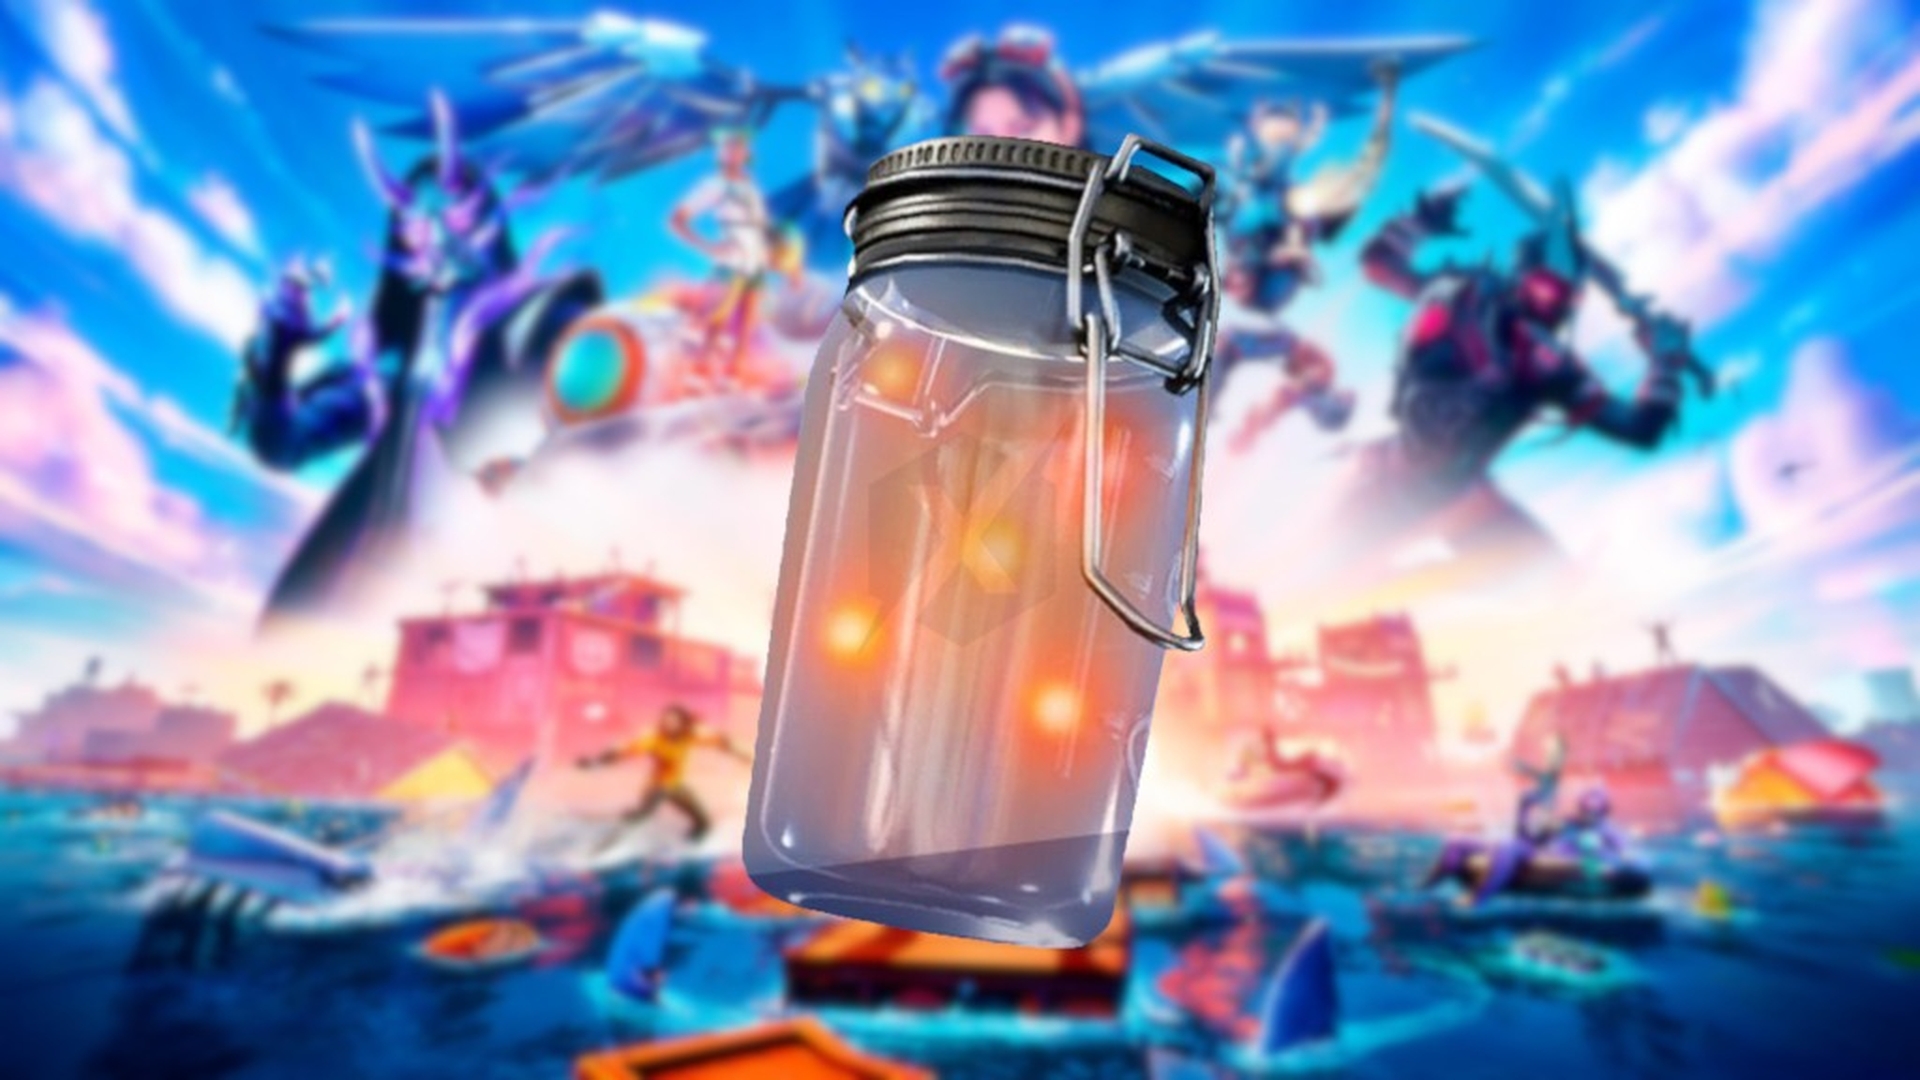 In this article, we are going to go over how to ignite structures in Fortnite, which requires Firefly Jars. We will go over how to obtain and use these jars.